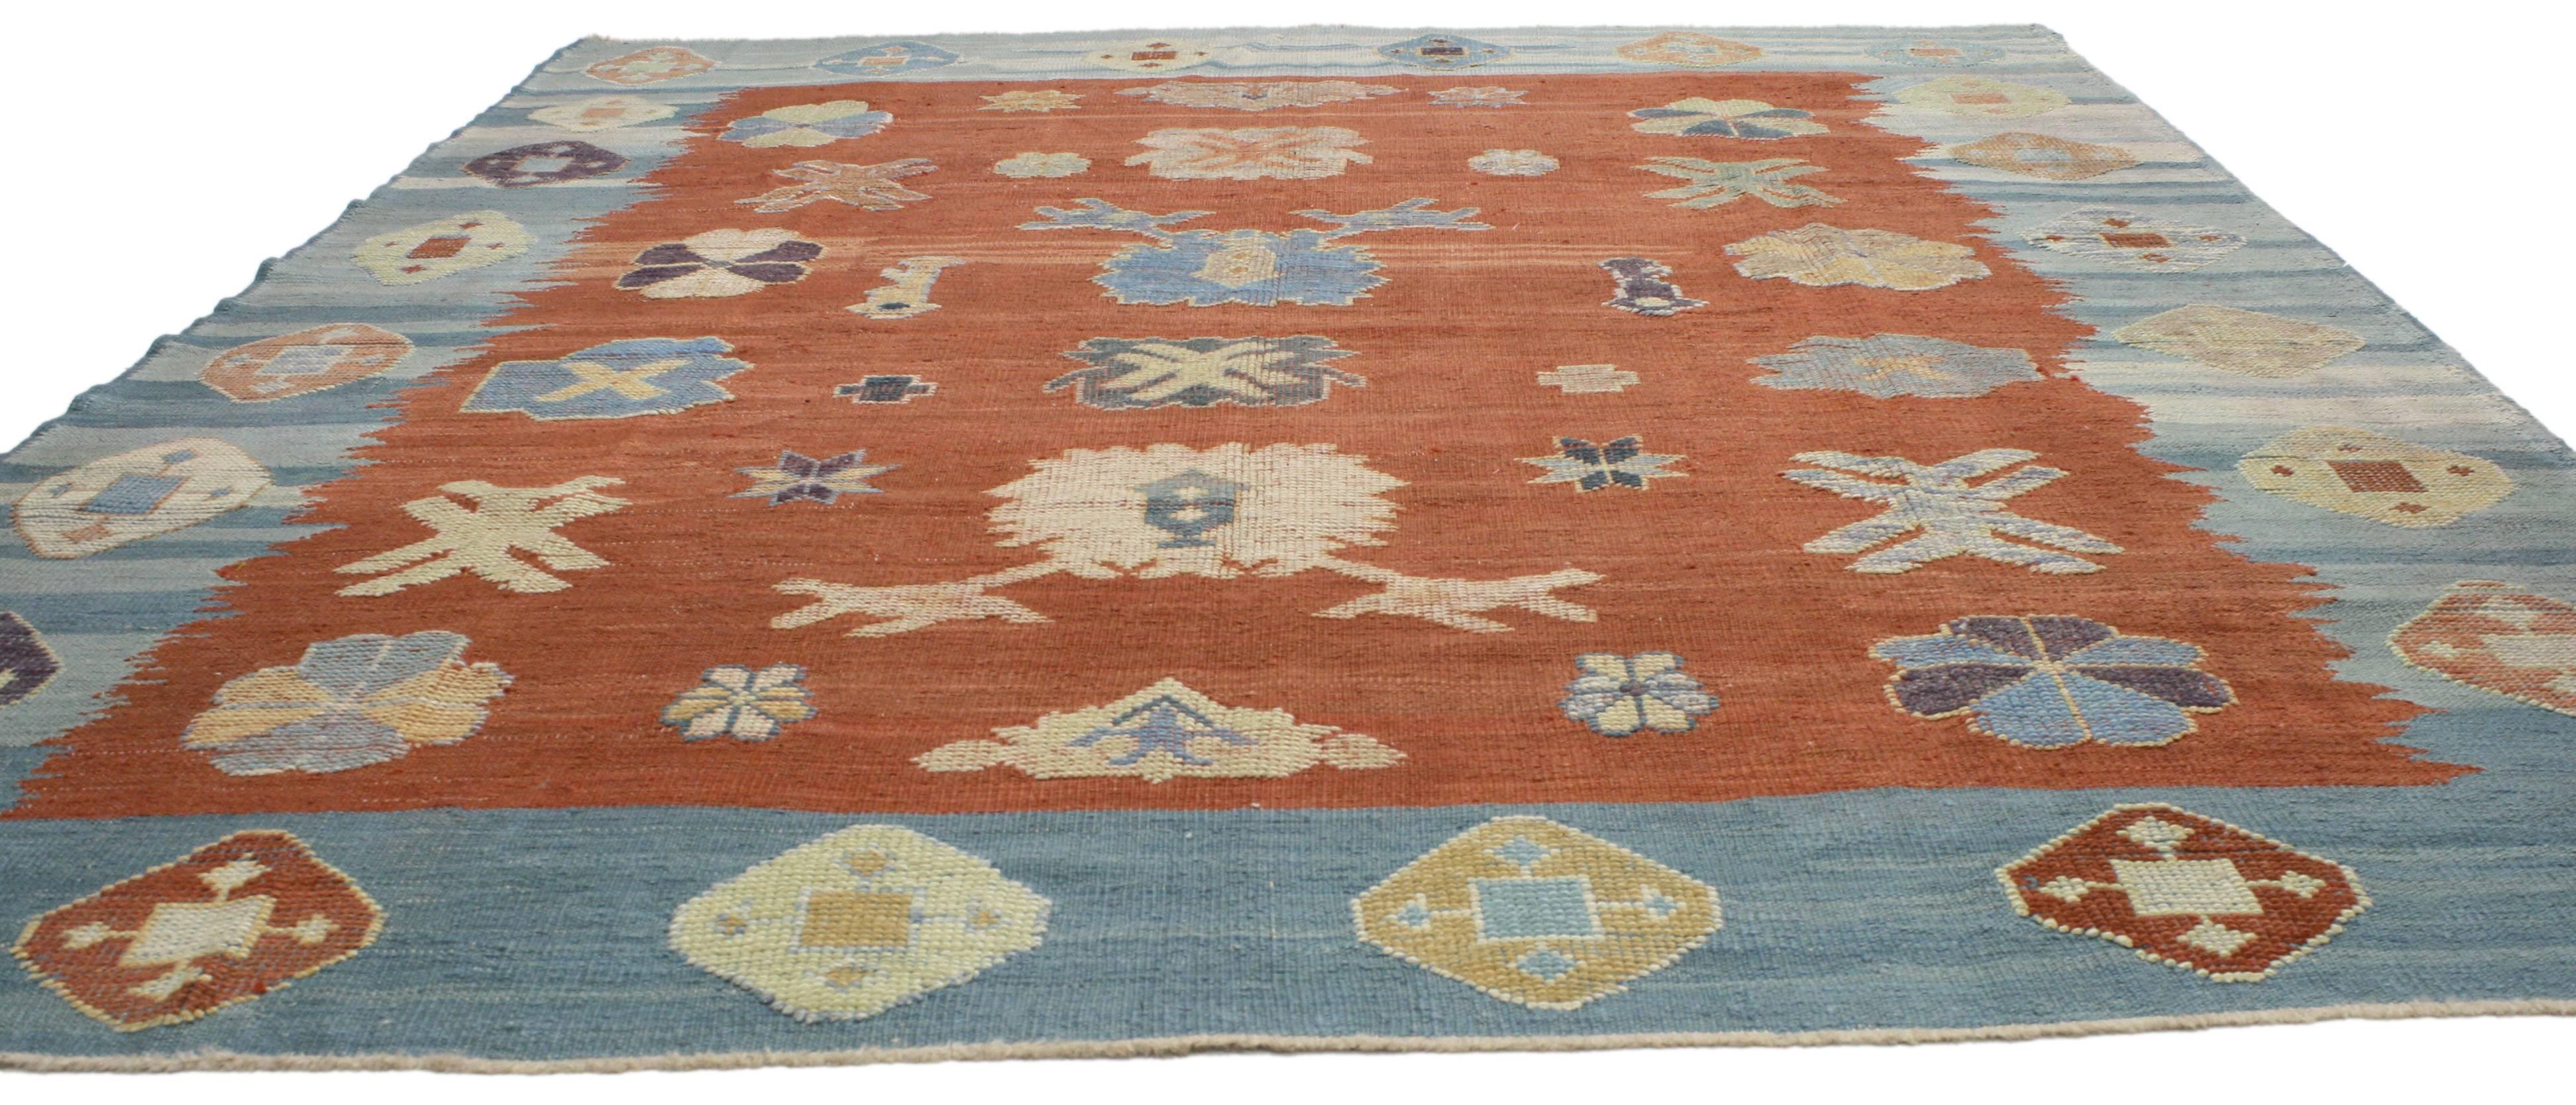 52207 Turkish Kilim rug with tribal style. Blue and orange Turkish Kilim rug with tribal style. This Turkish Kilim rug has a distinctly tribal style with geometric shapes galore. The dark orange and blue hues give it a warm, inviting feel and